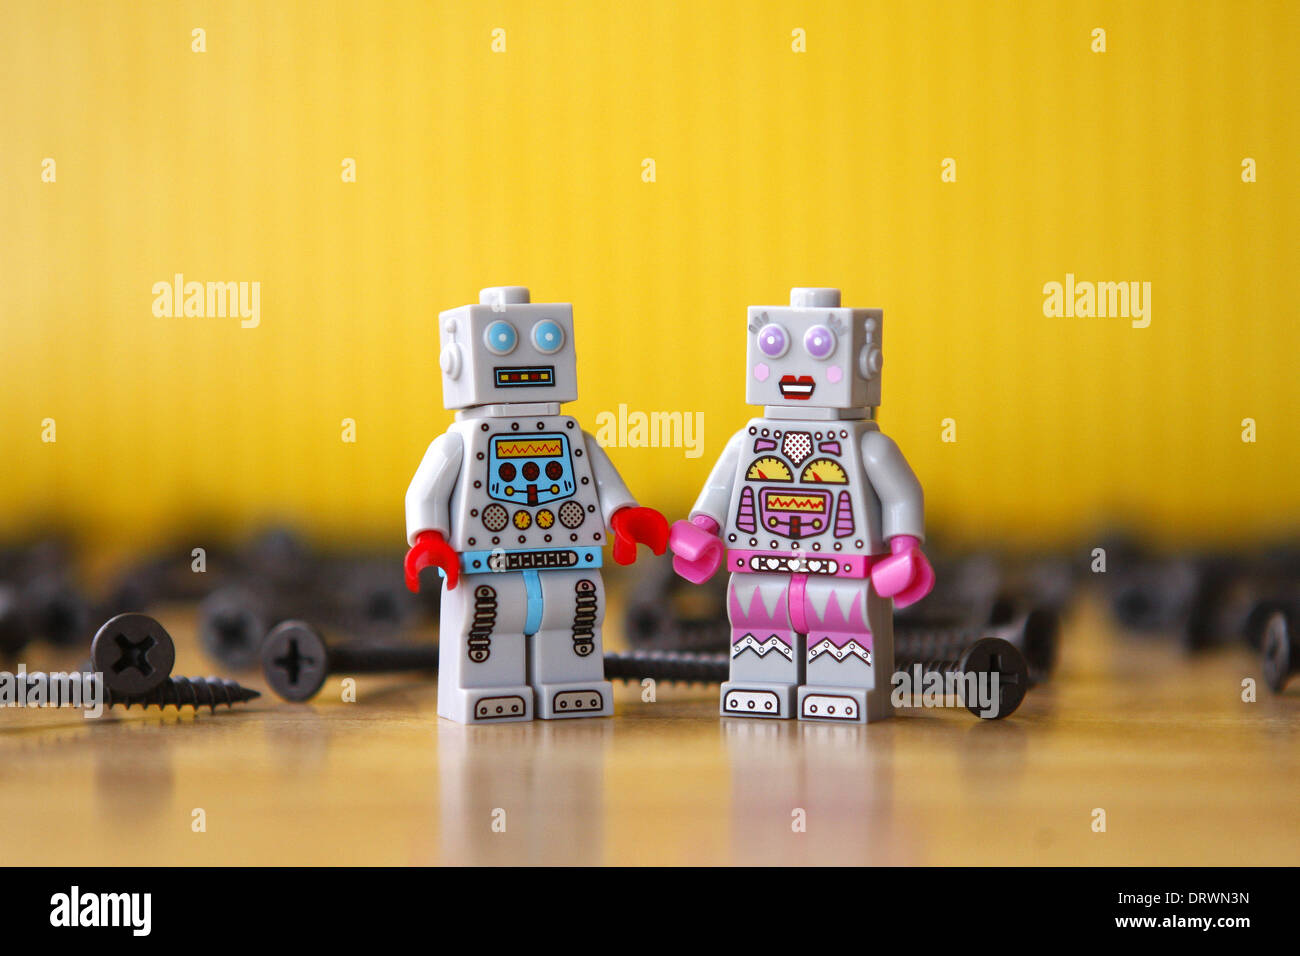 Grey male and female toy Lego robots surrounded by screws. Yellow background, wood floor Stock Photo